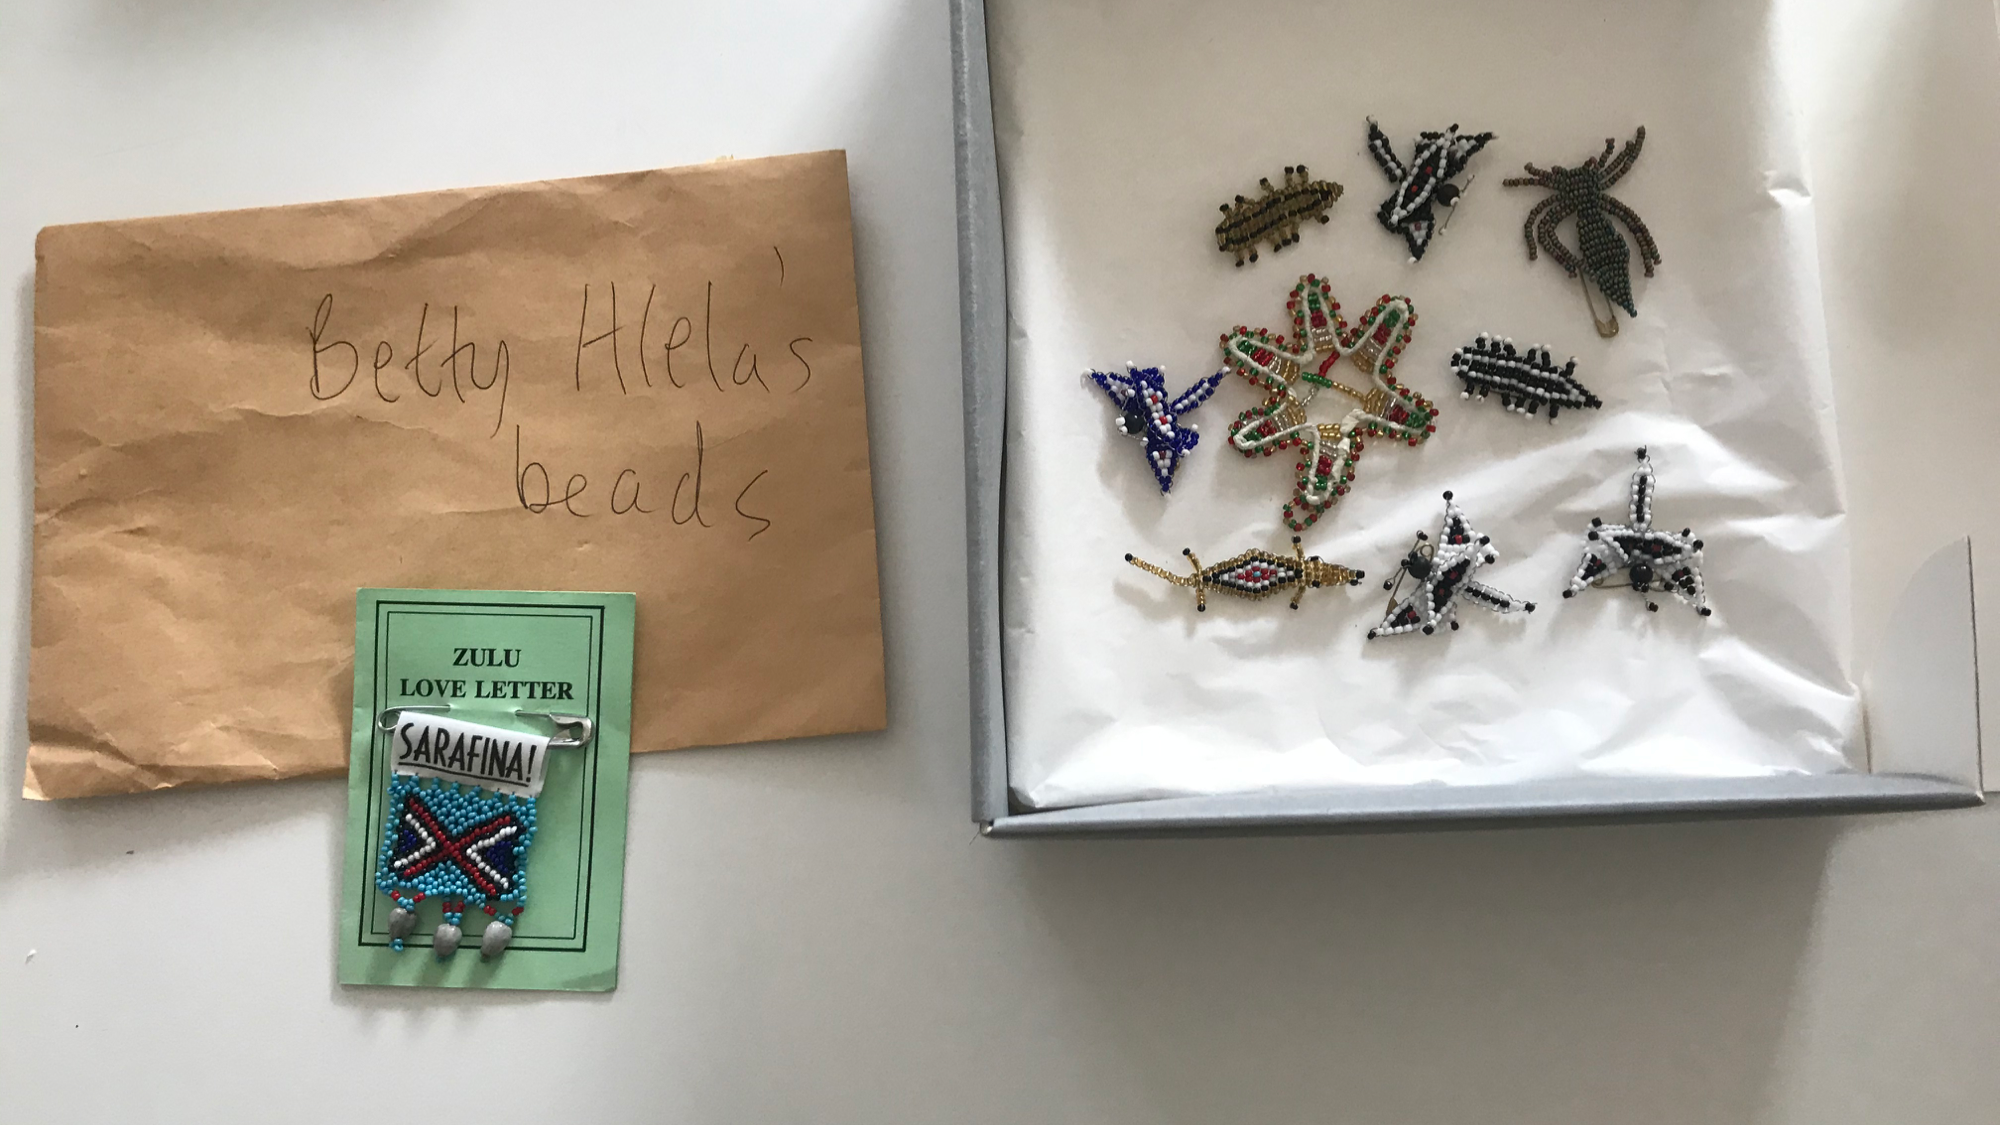  On the left is a brown envelope which reads 'Betty Hlela's beads' in handwritten biro pen. The Zulu love letter card with the safety pinned Zulu beaded badge is placed on top of it. On the right is a box of nine beaded badges in the shape of dragonf